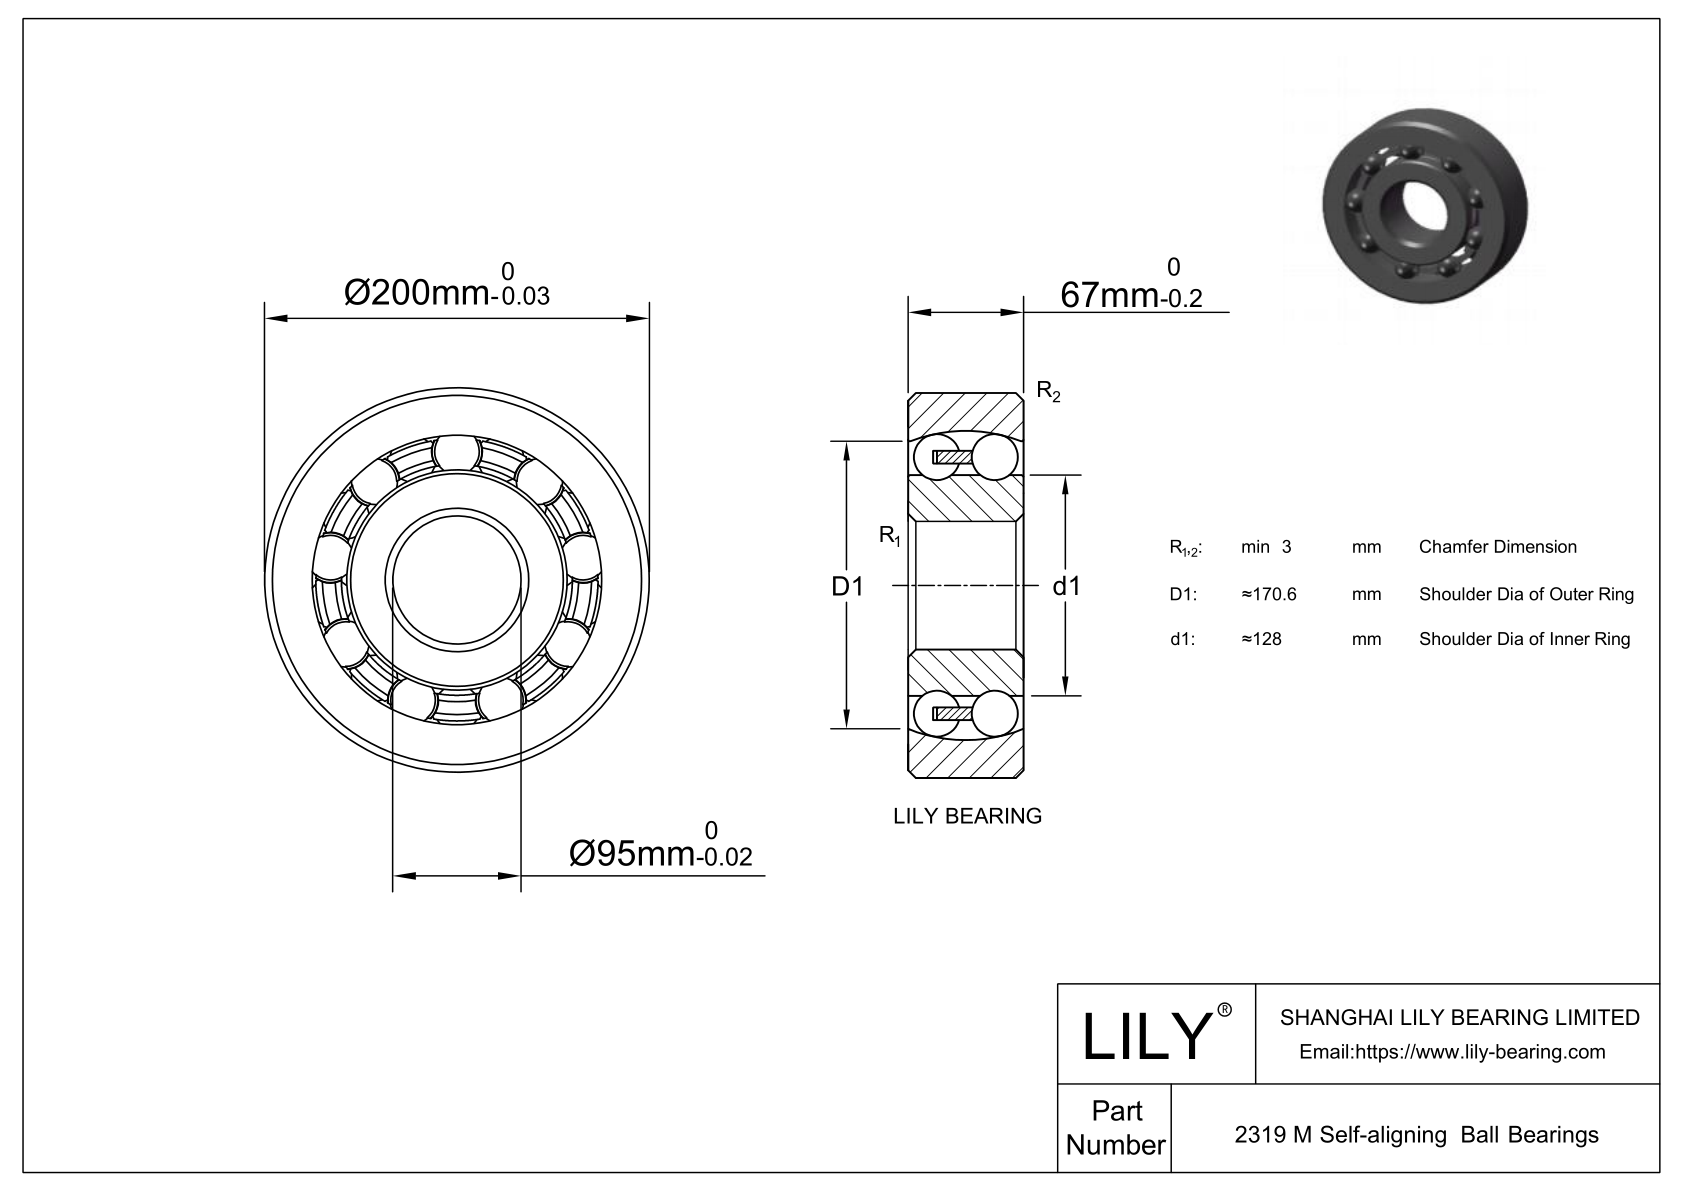 S2319 M Stainless Steel Self Aligning Ball Bearings cad drawing